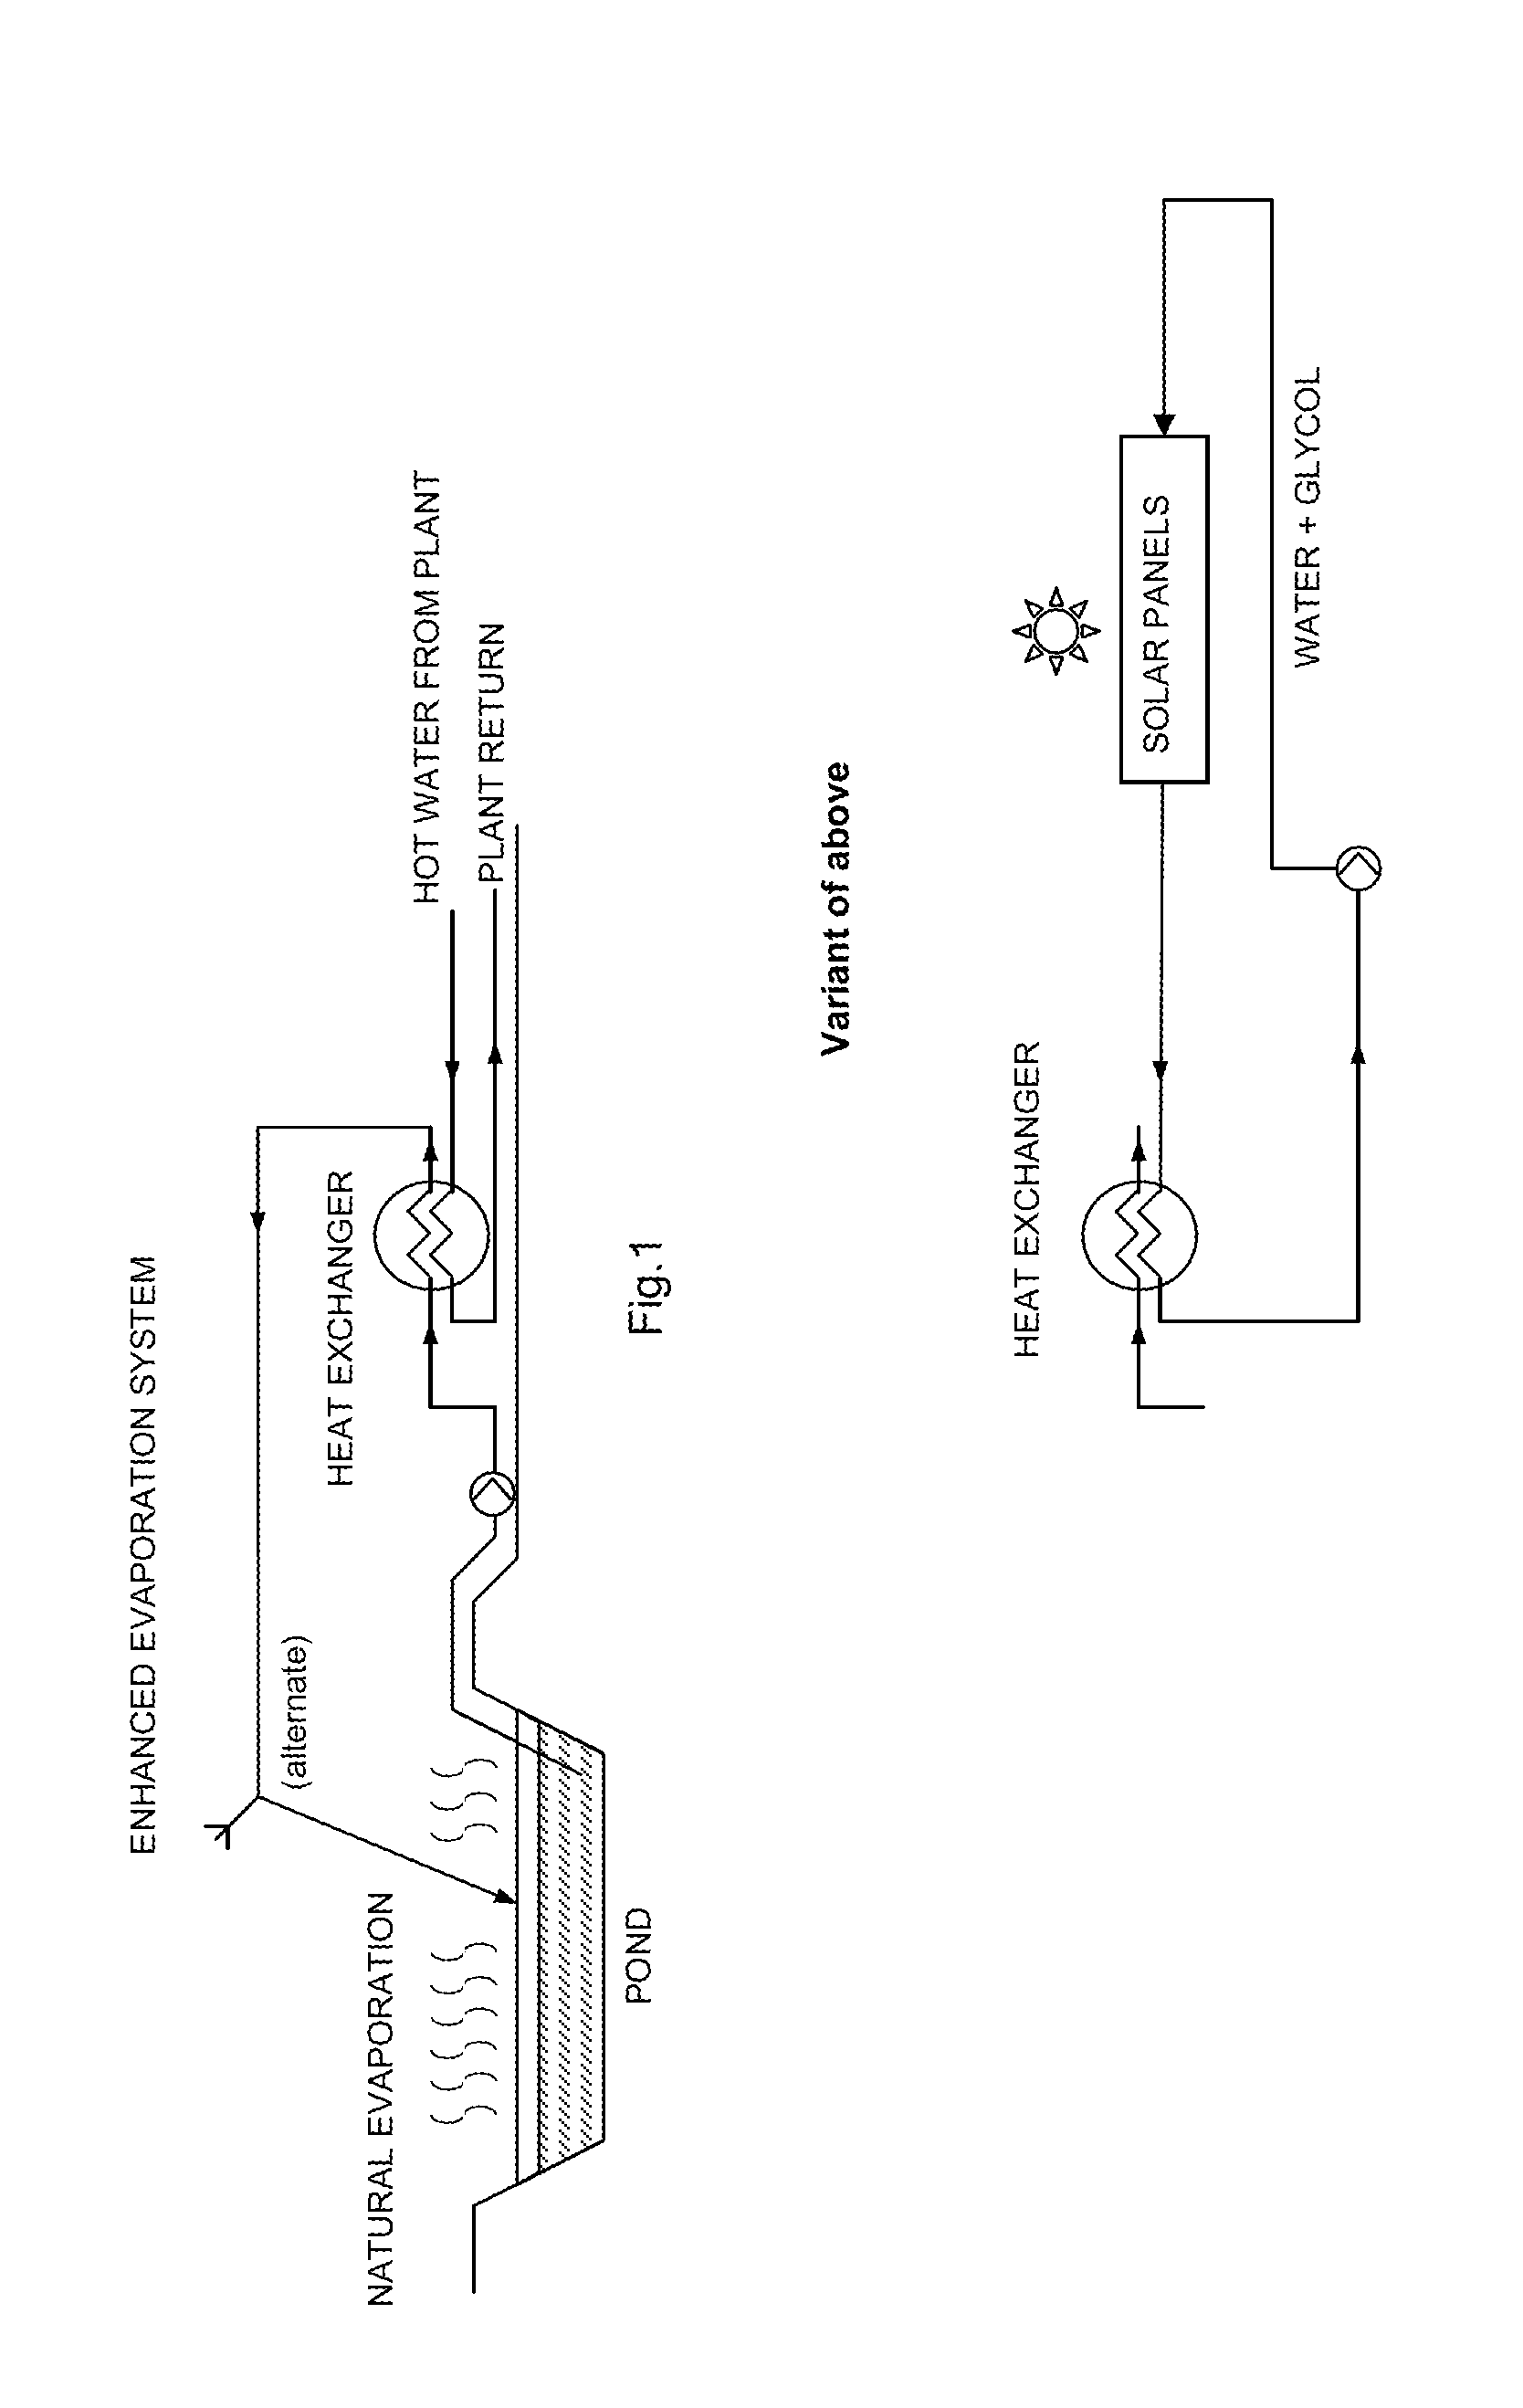 Method for increasing evaporation rate of an evaporative pond using solar energy